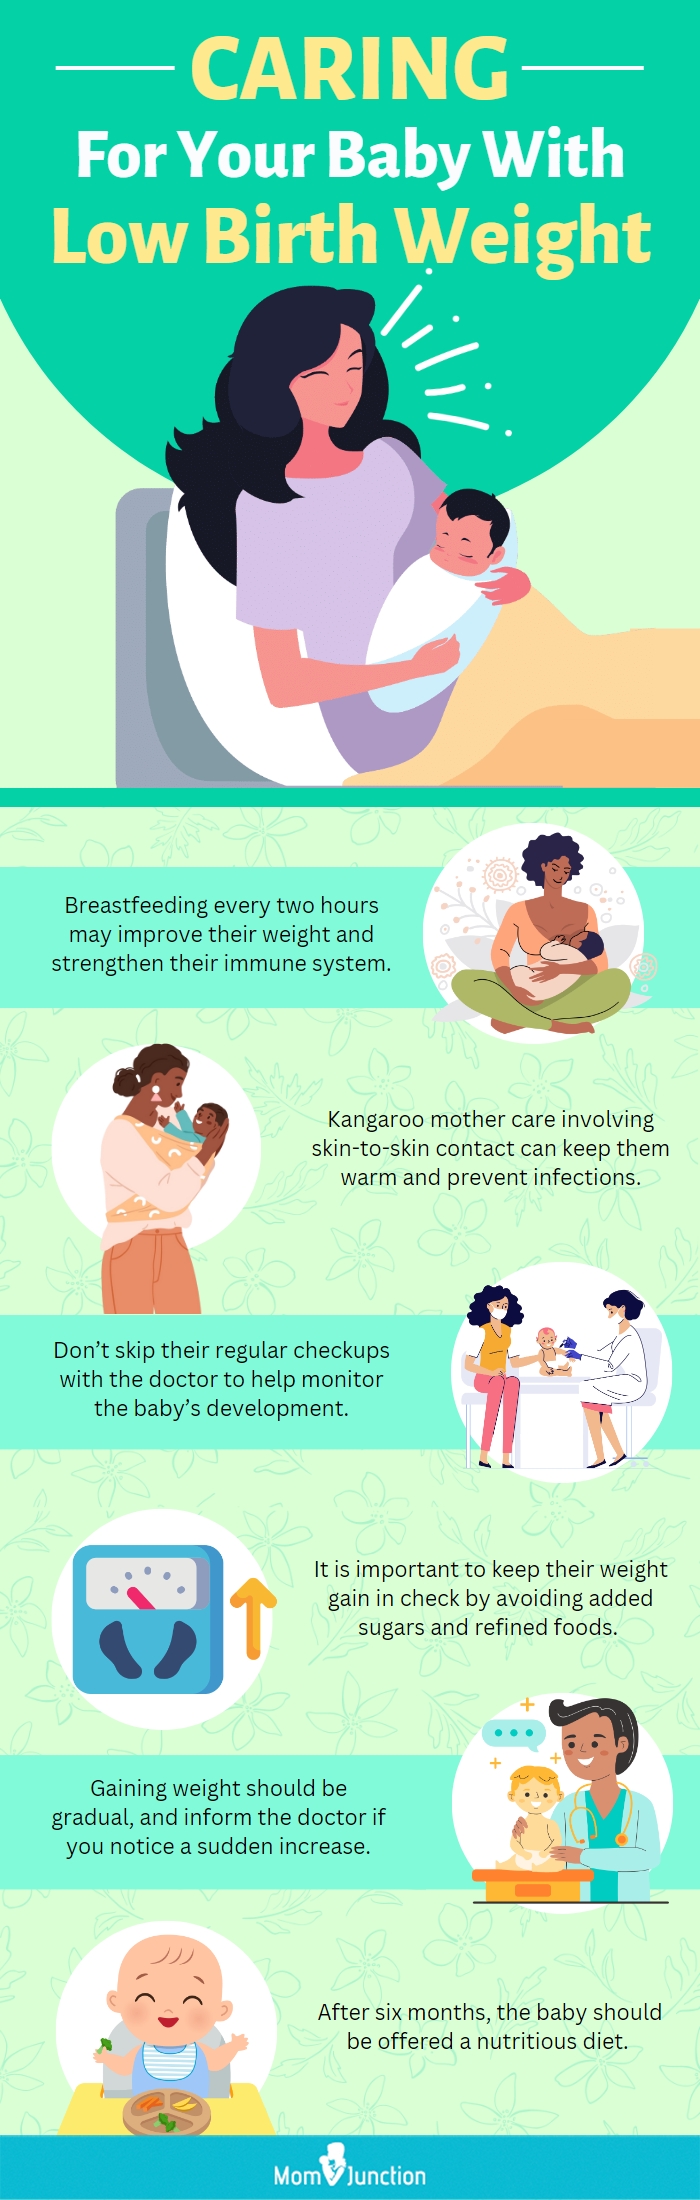 caring for your baby with low birth weight (infographic)